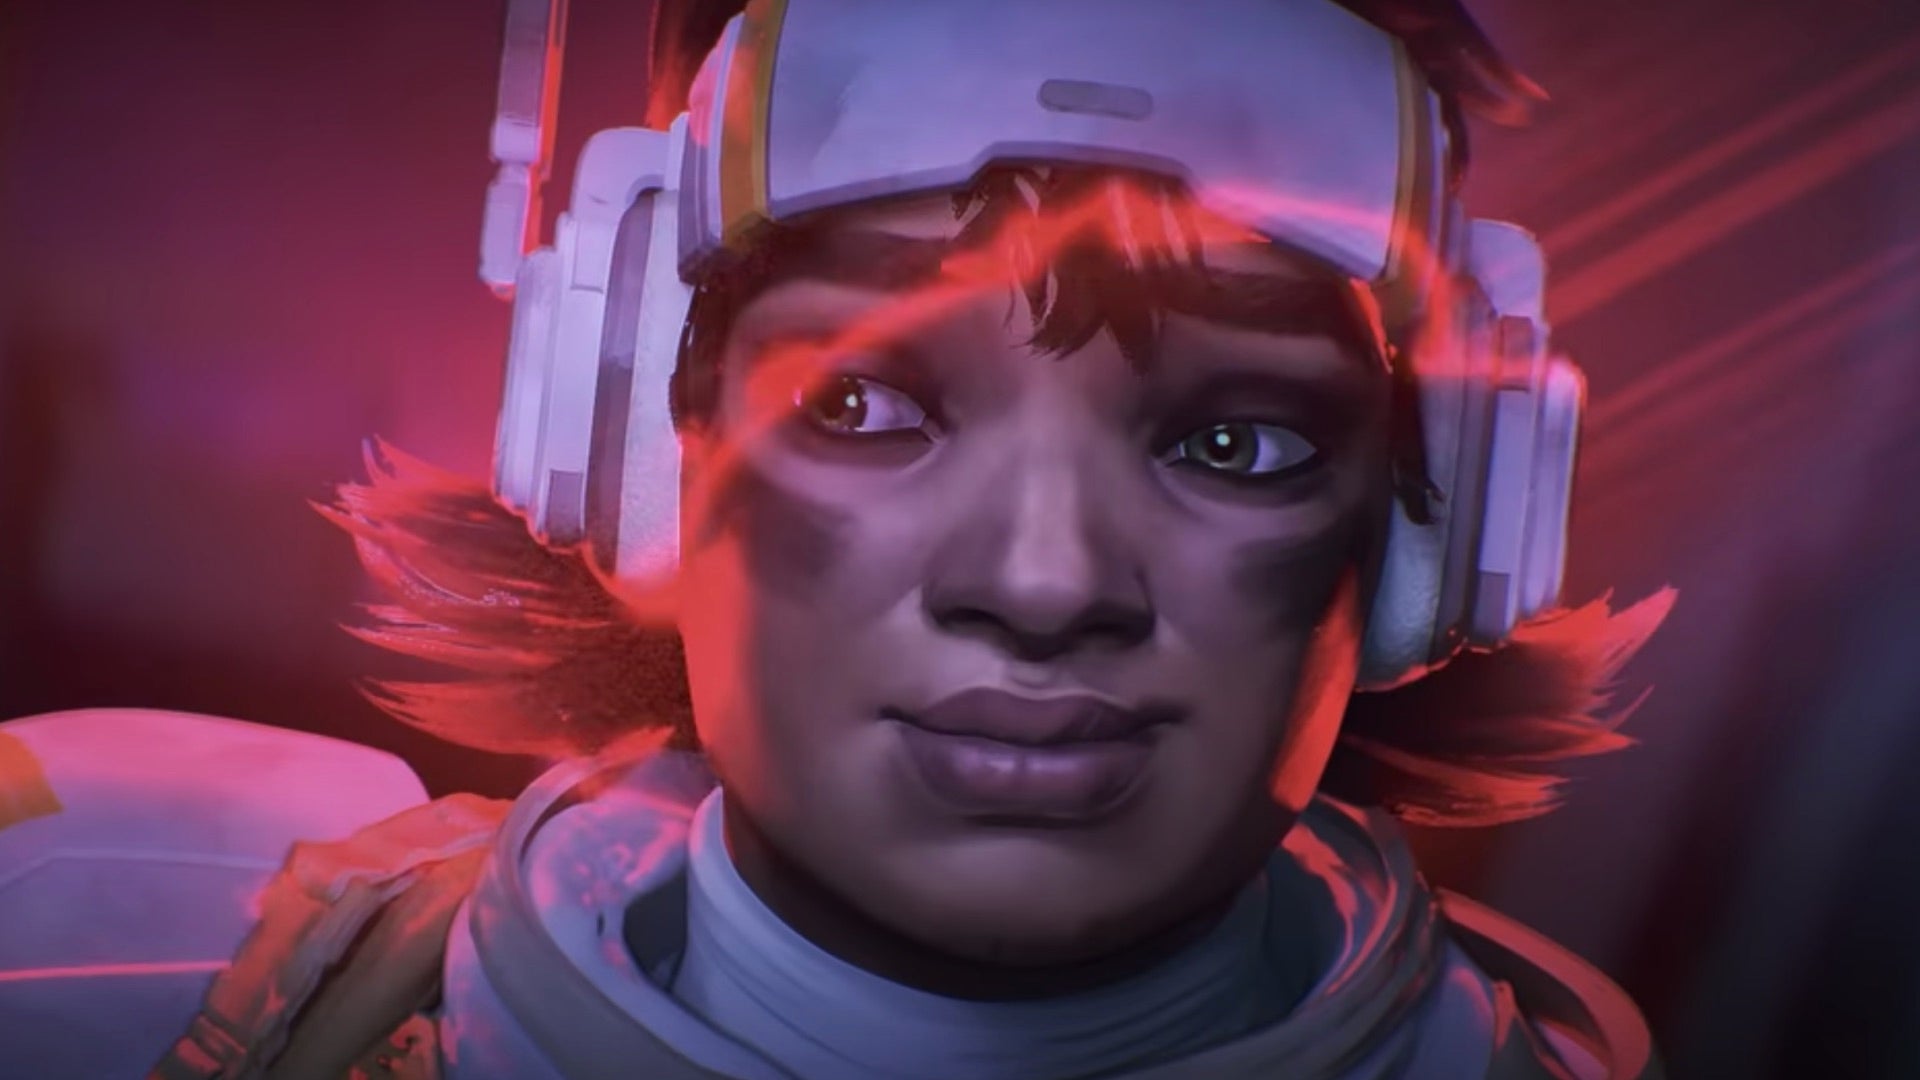 Image for Get an early sneak peek at Apex Legends' next character